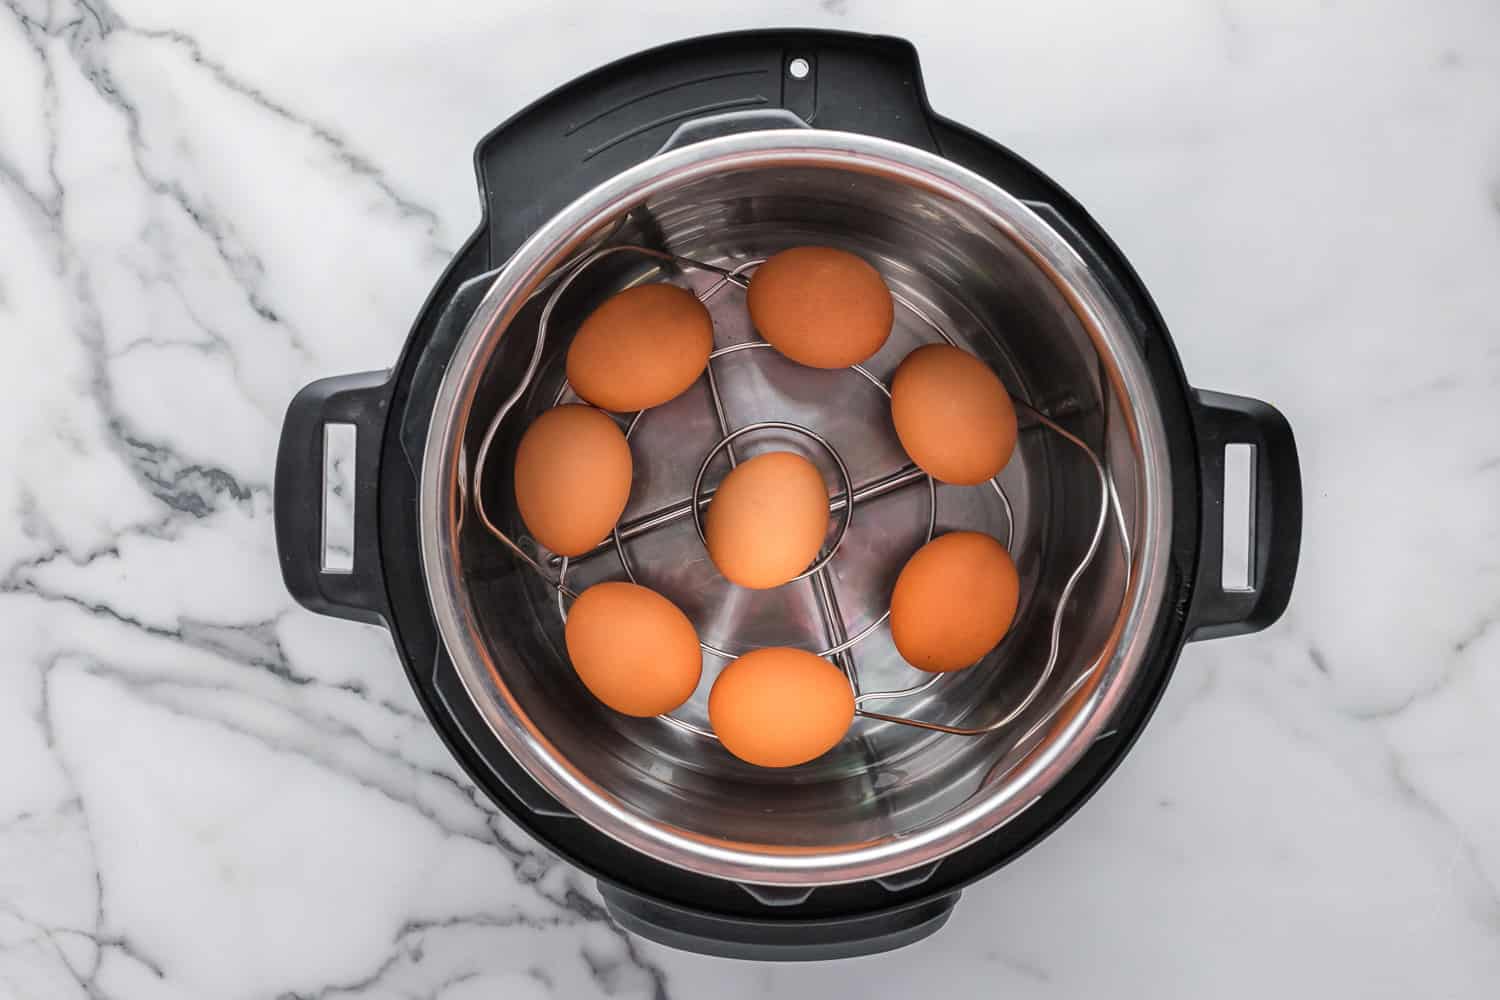 Brown eggs in an instant pot.